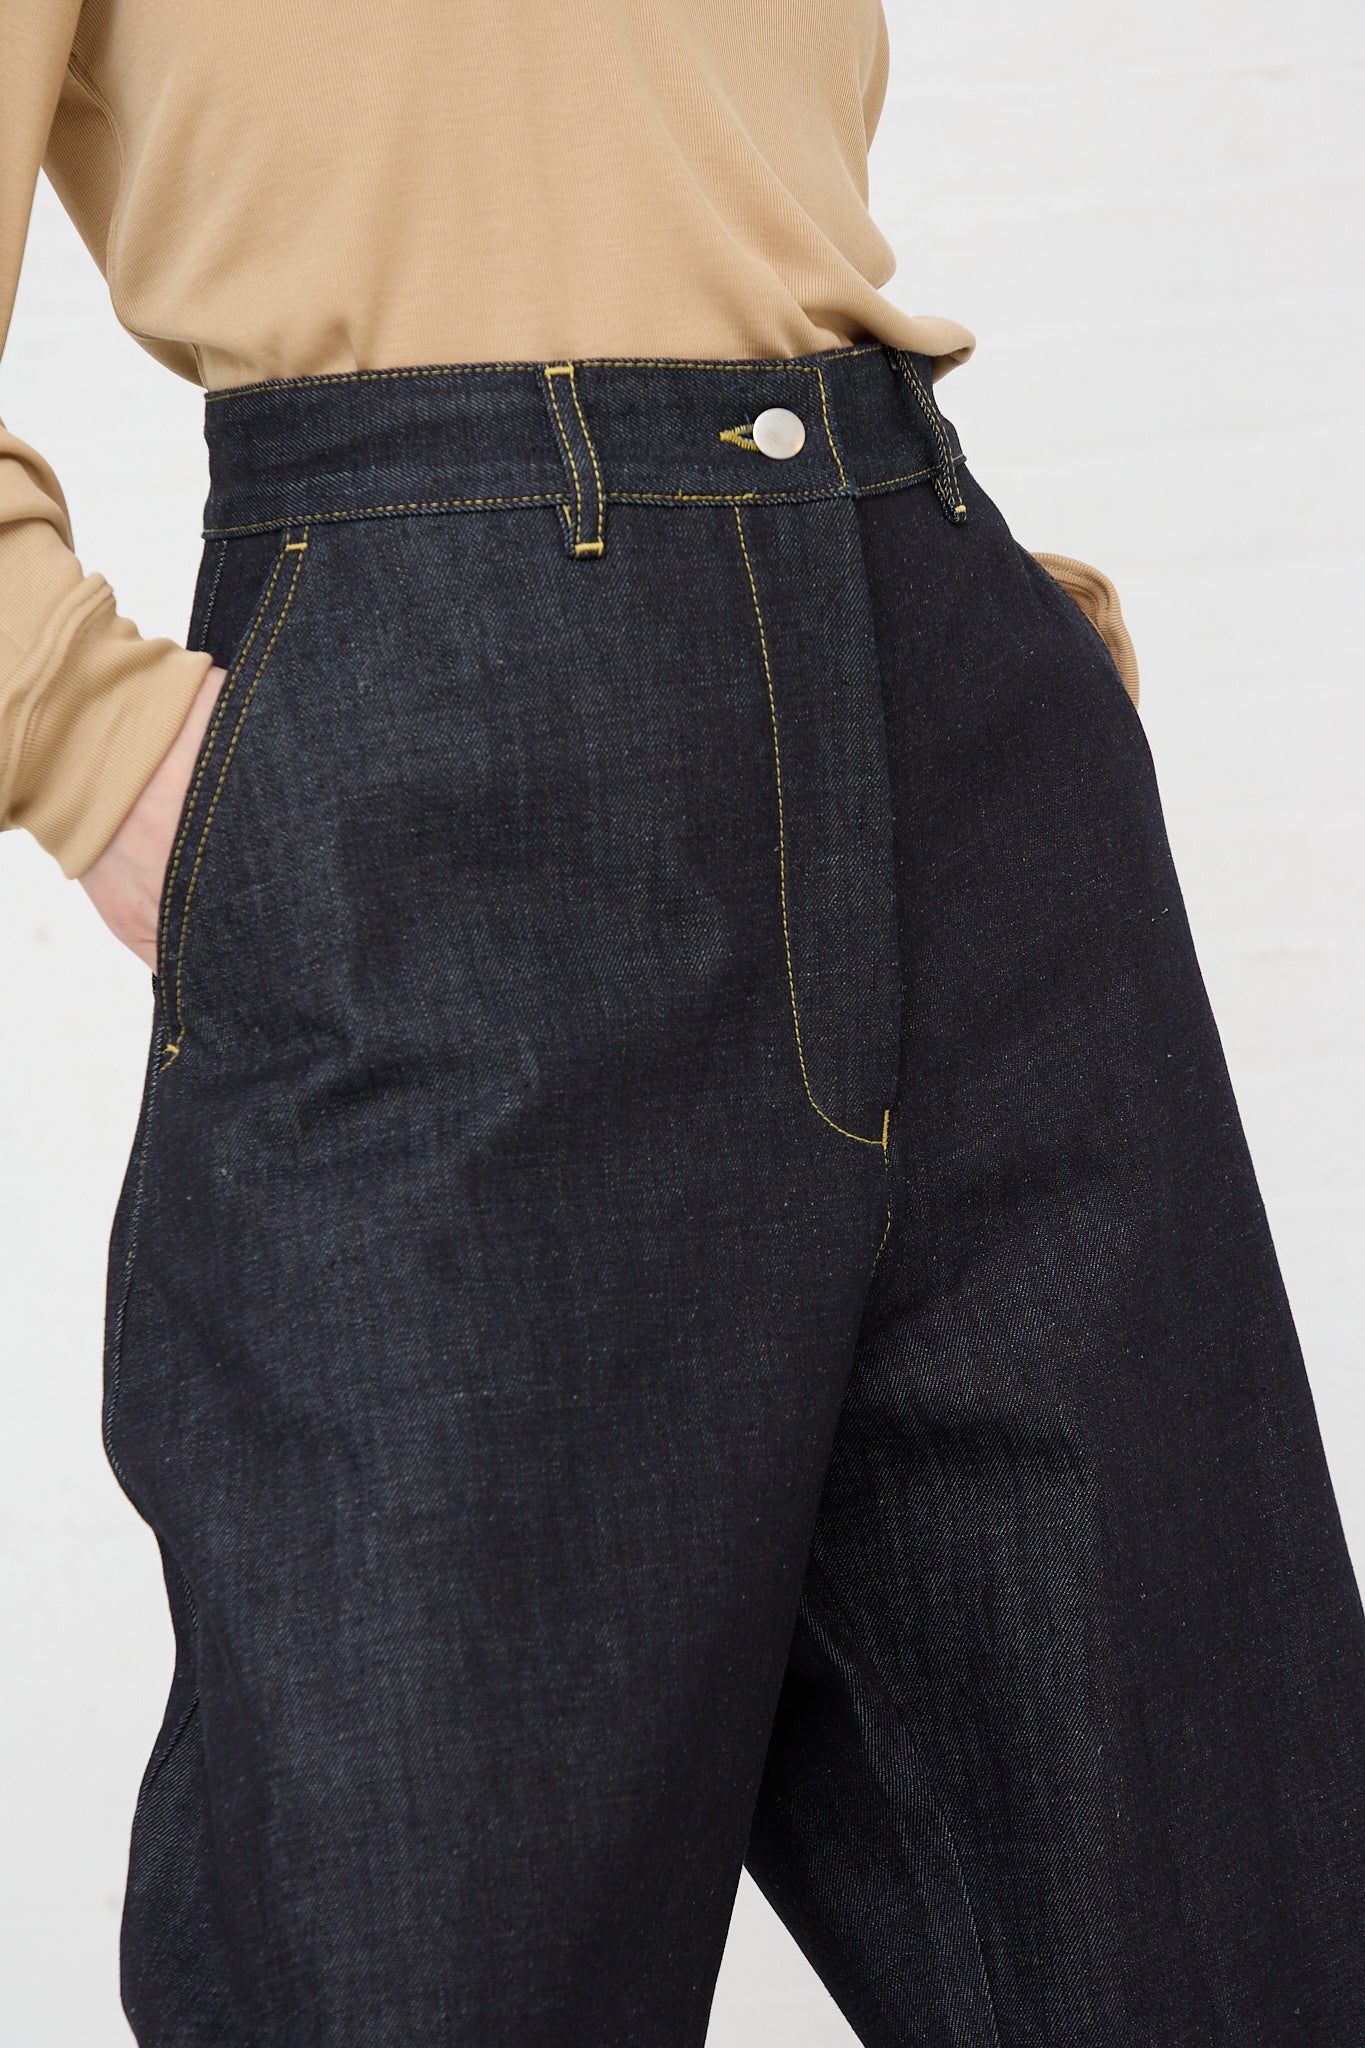 The back of a woman wearing Studio Nicholson's Chalco Wide Crop Jean in Raw Indigo, made from recycled denim.